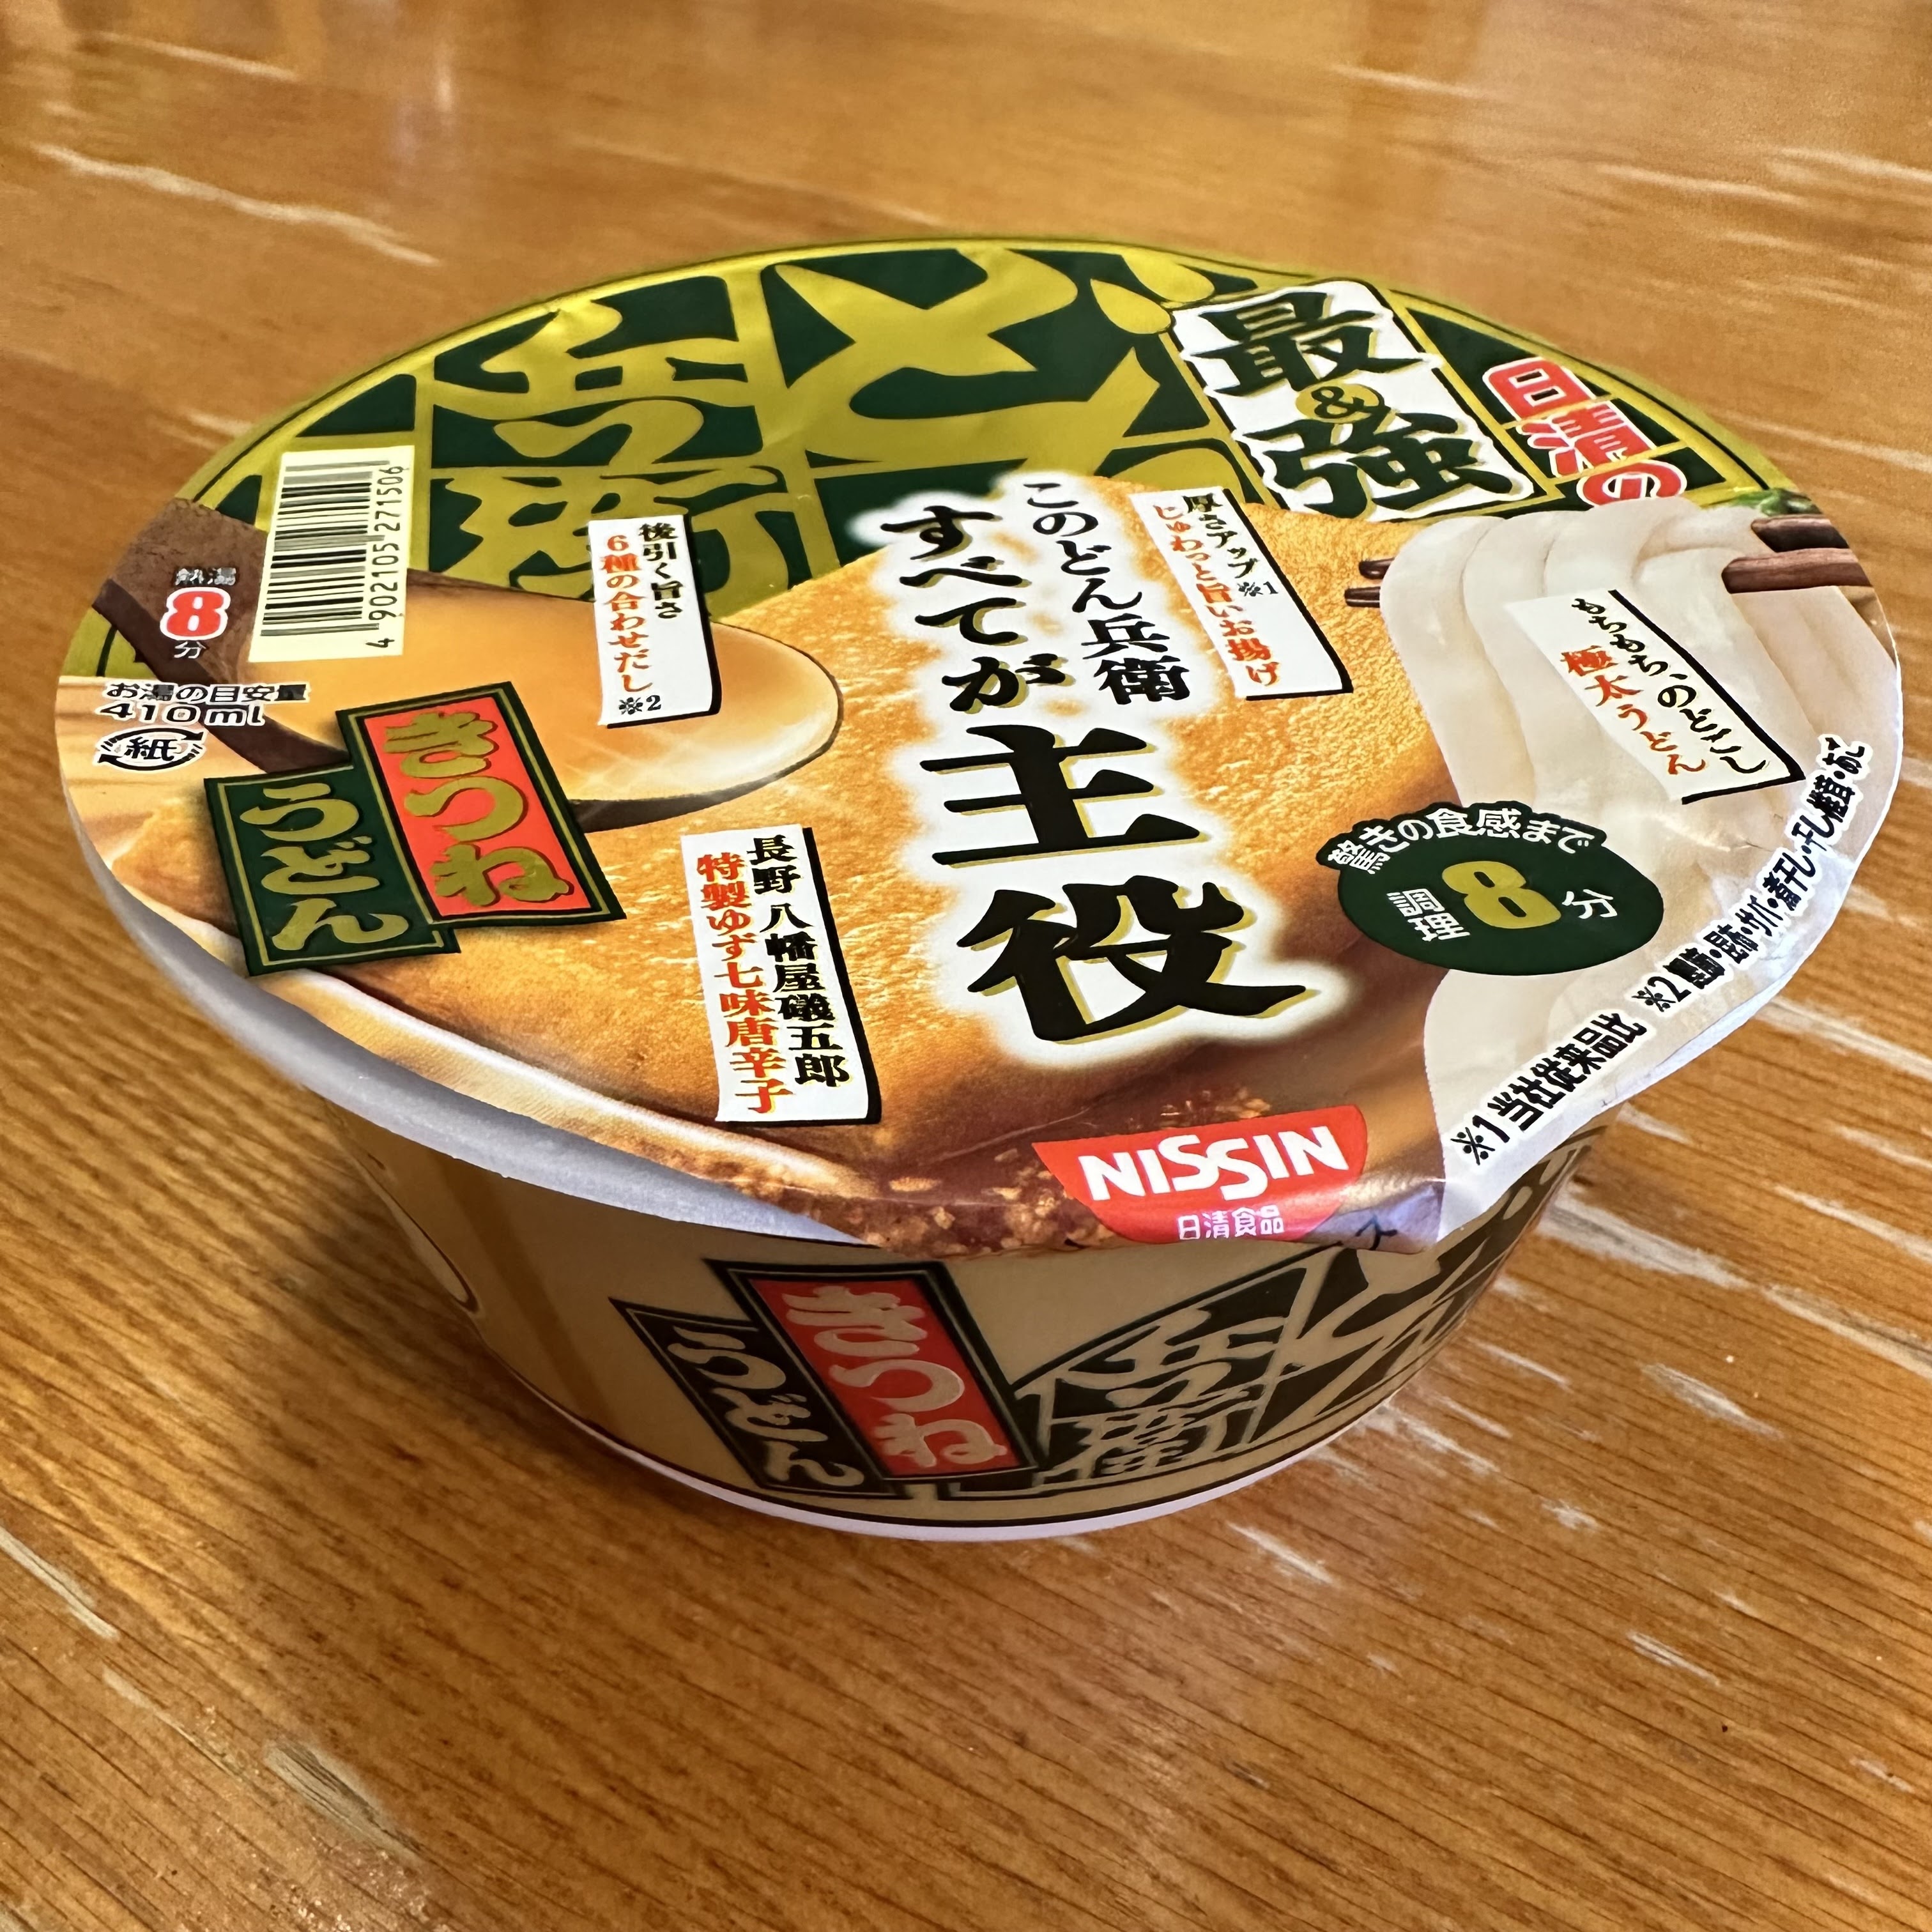 Japan's Famous Cup Noodles Museum Has Opened in Hong Kong